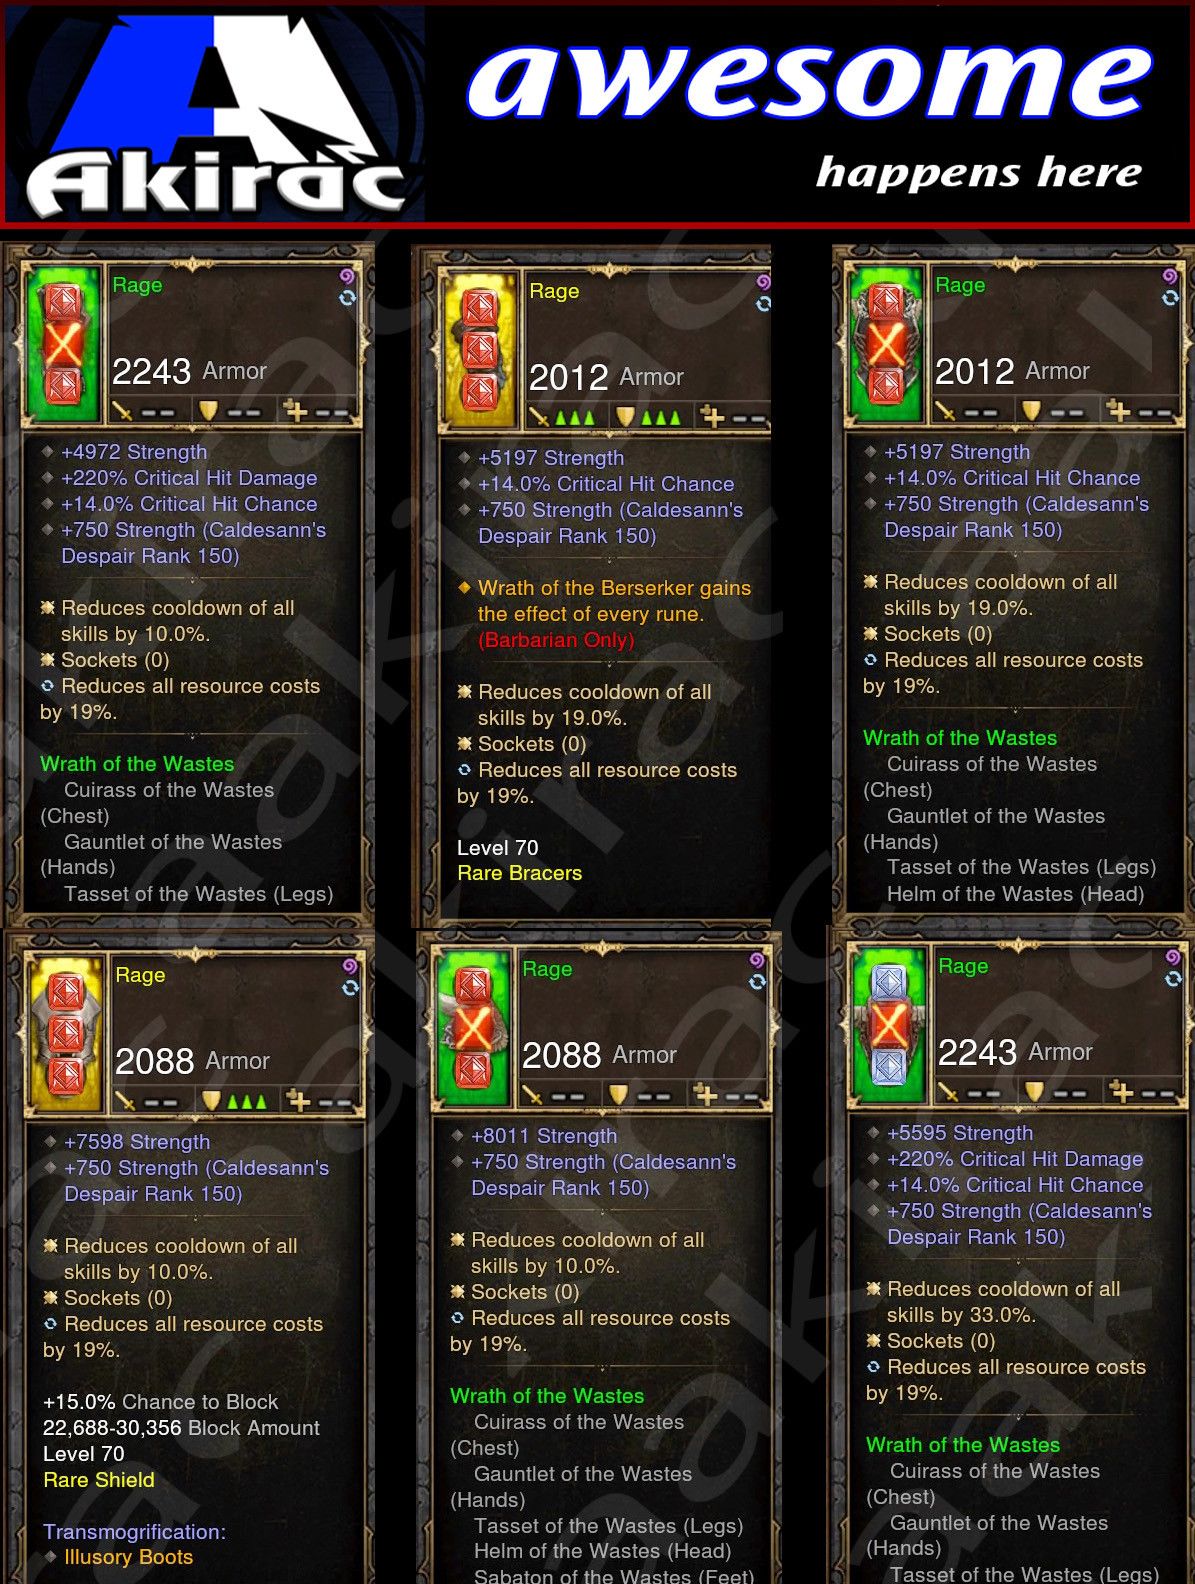 Diablo 3 Immortal v2 Waste Barbarian Modded Set for Rift 150 Rage Diablo 3 Mods ROS Seasonal and Non Seasonal Save Mod - Modded Items and Gear - Hacks - Cheats - Trainers for Playstation 4 - Playstation 5 - Nintendo Switch - Xbox One